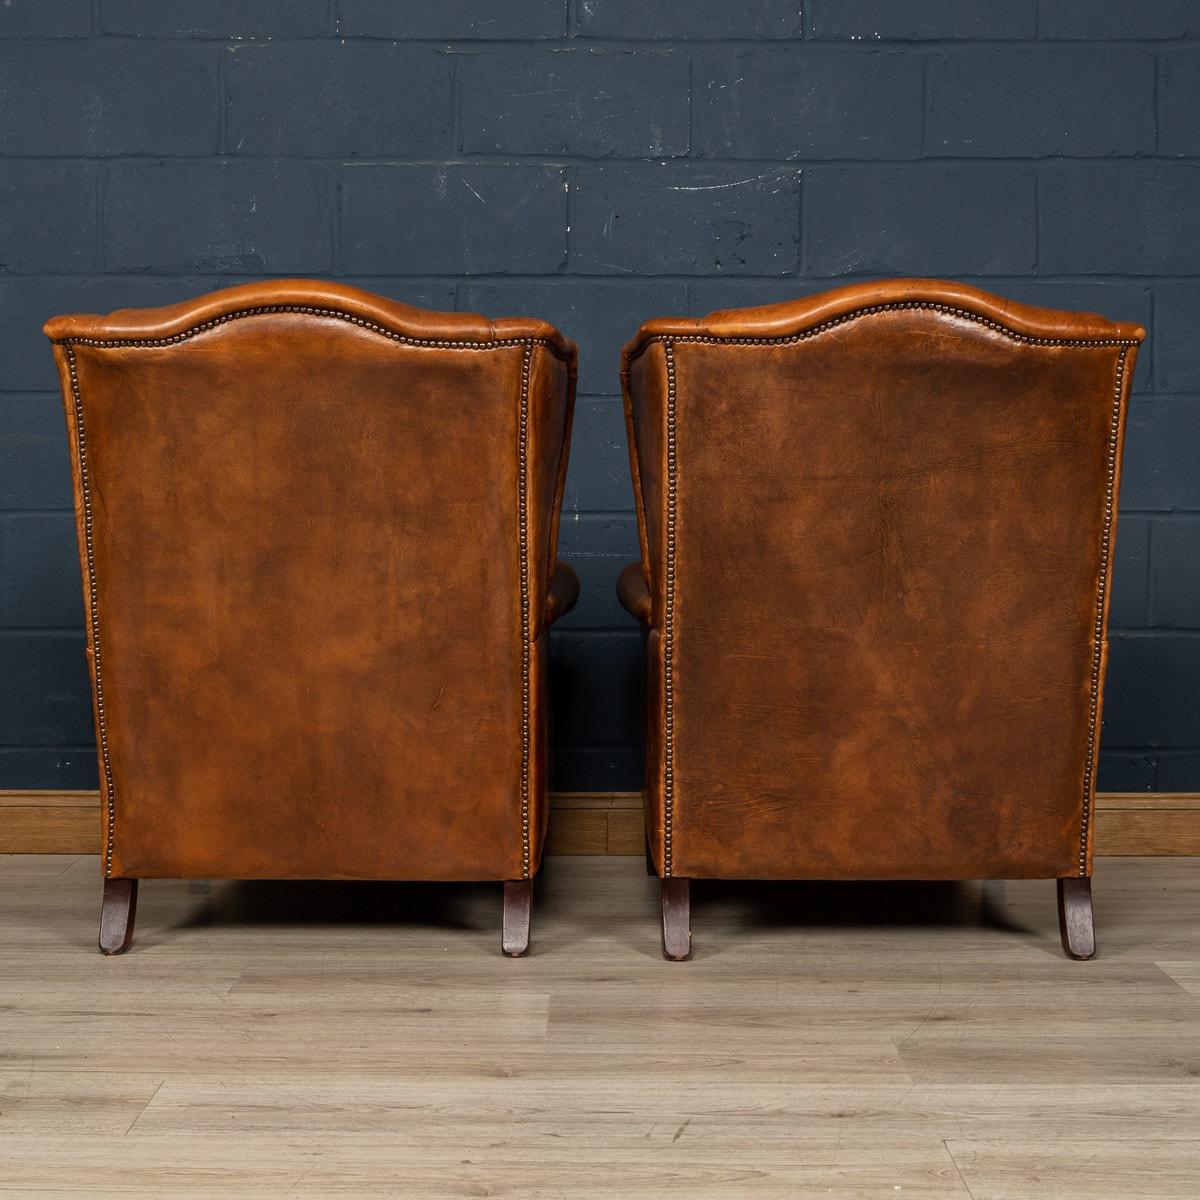 20th Century Dutch Sheepskin Leather Wing-Back Armchairs For Sale 1